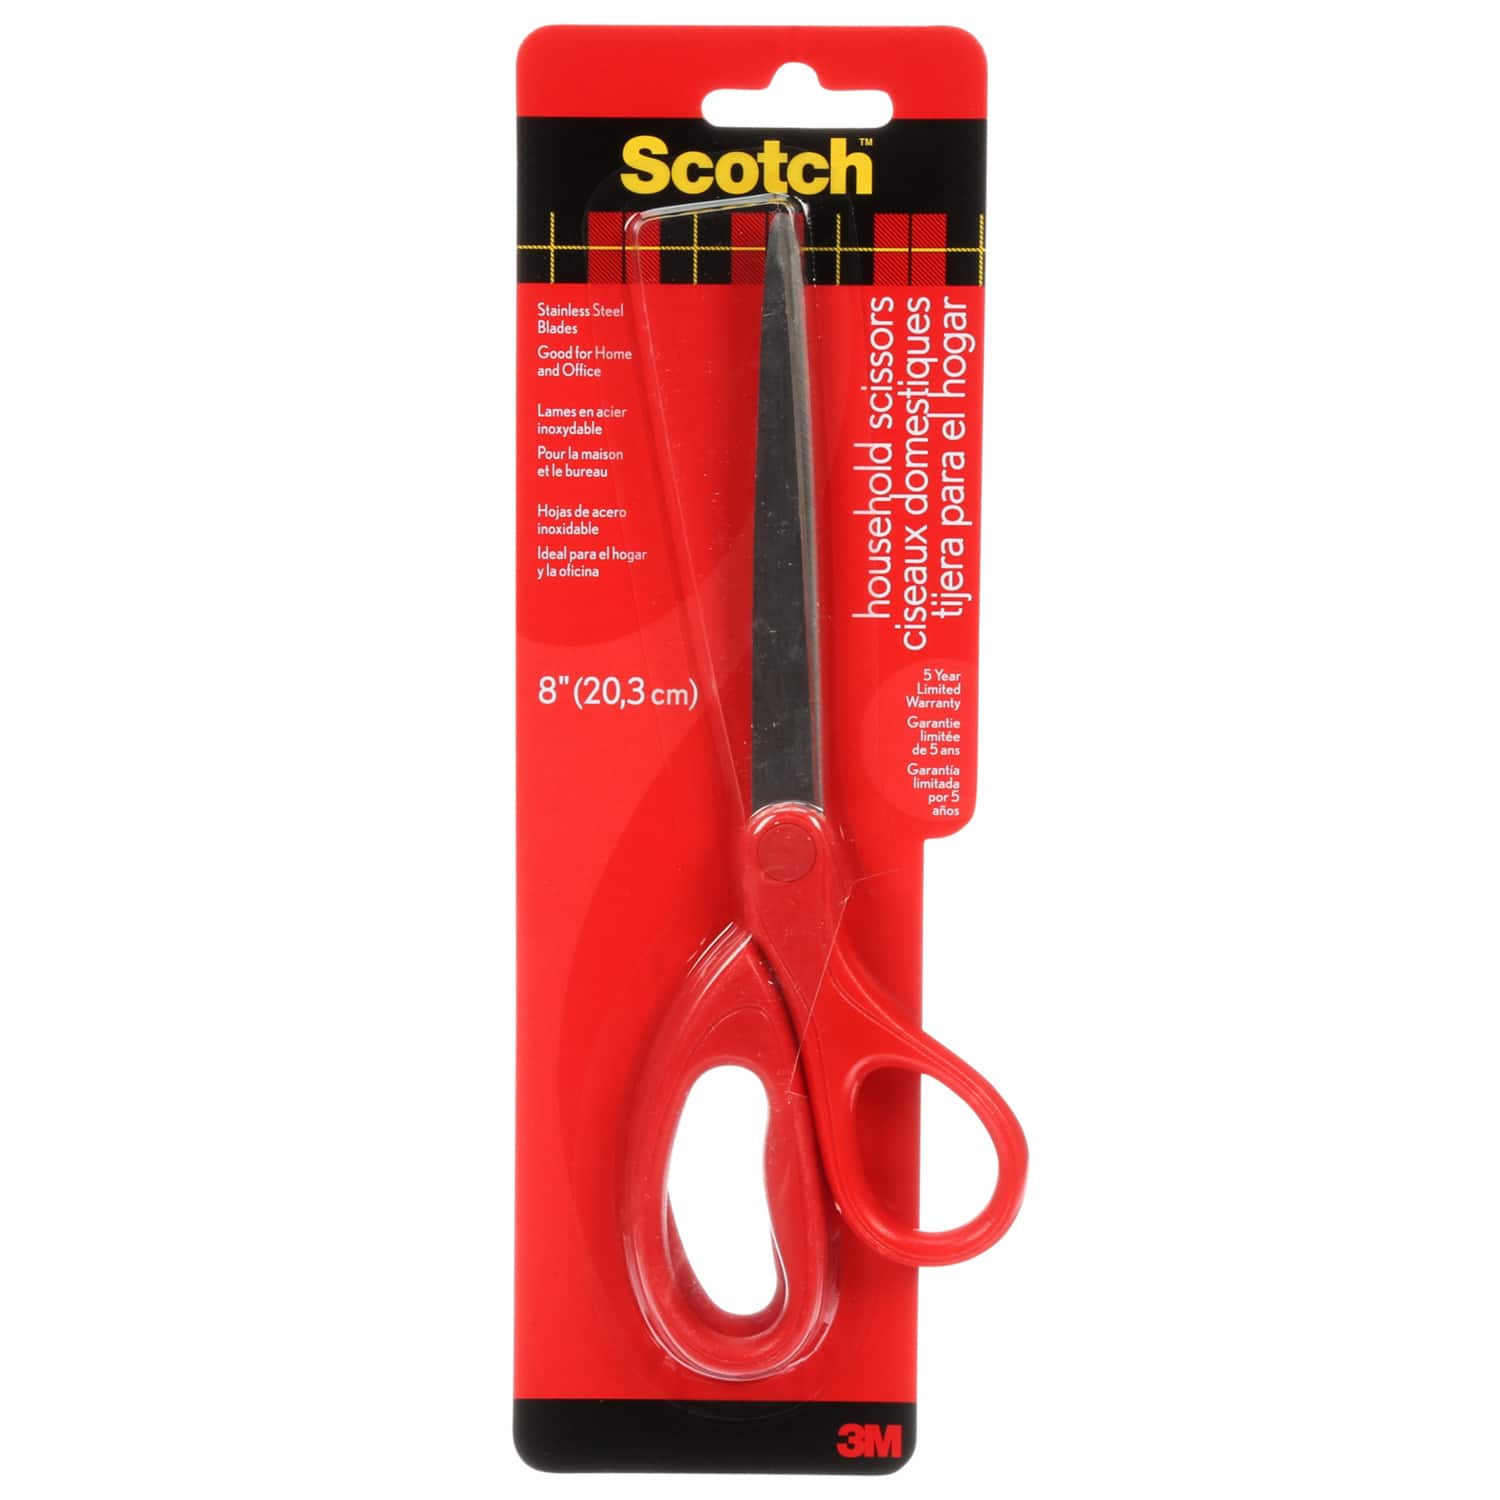 12 Pack: 3M Scotch Household Scissors, Size: 8, Other